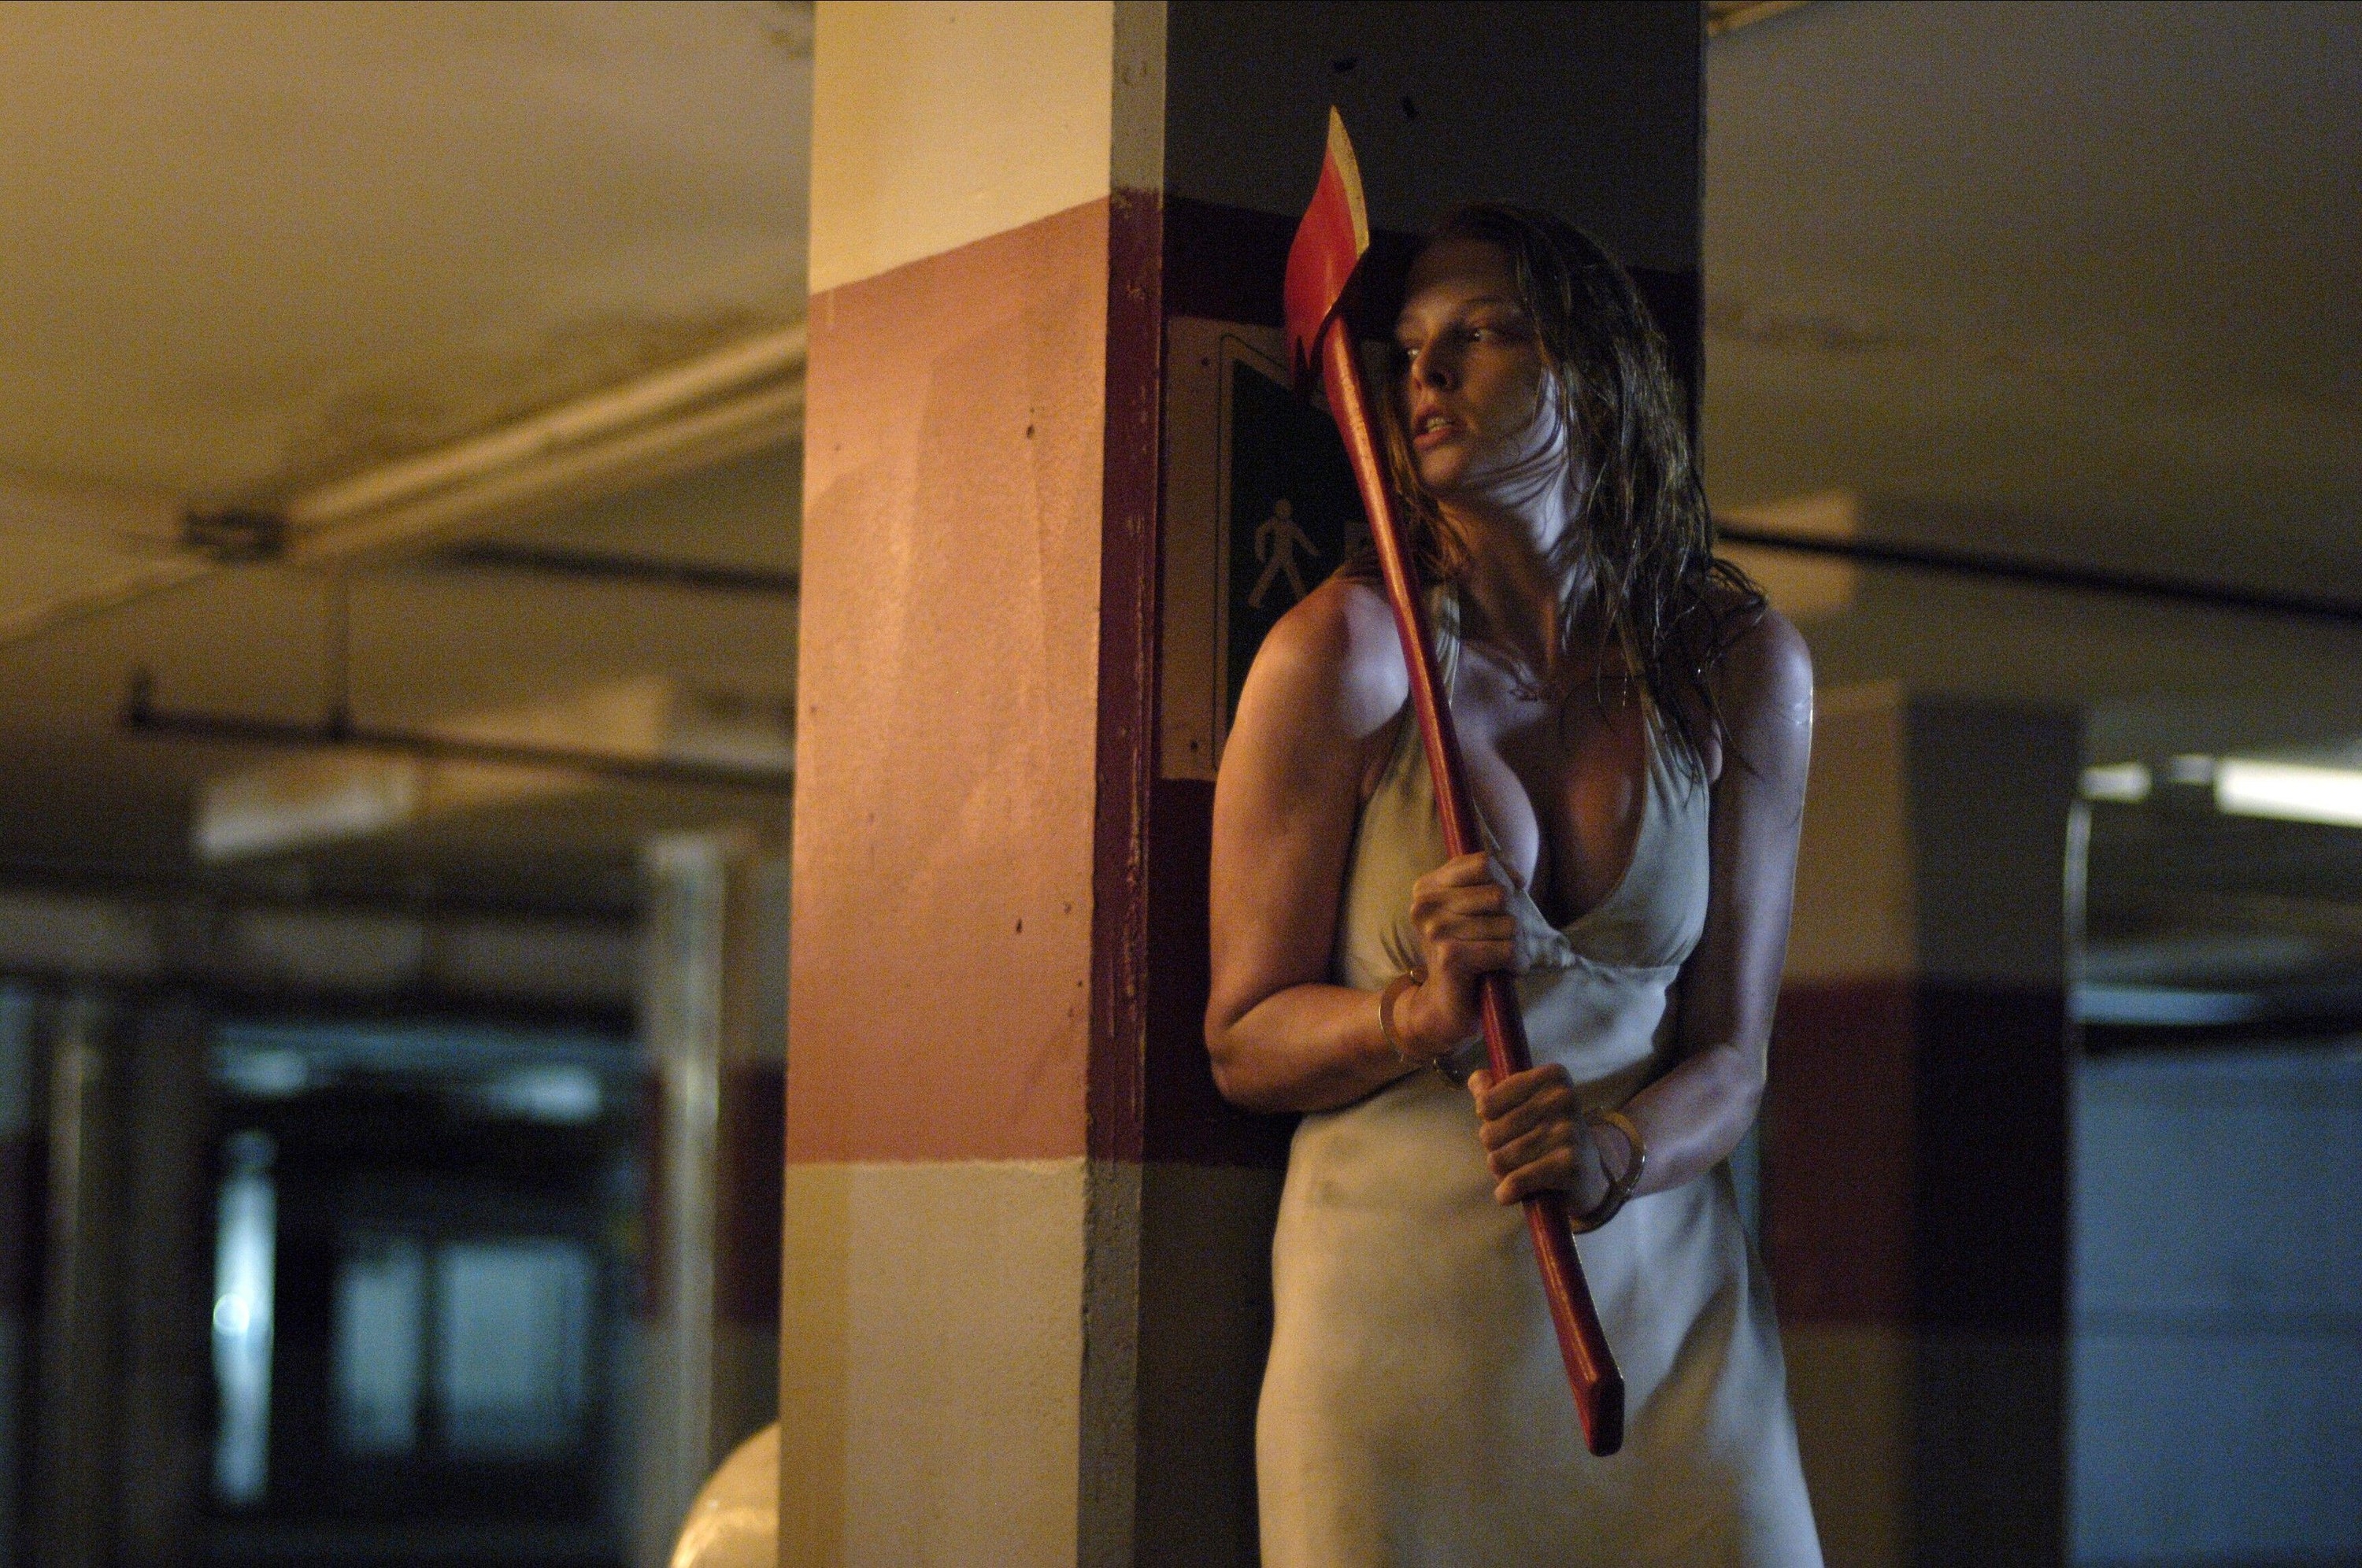 A woman in a revealing white dress hides near a pillar in a parking garage while holding an axe